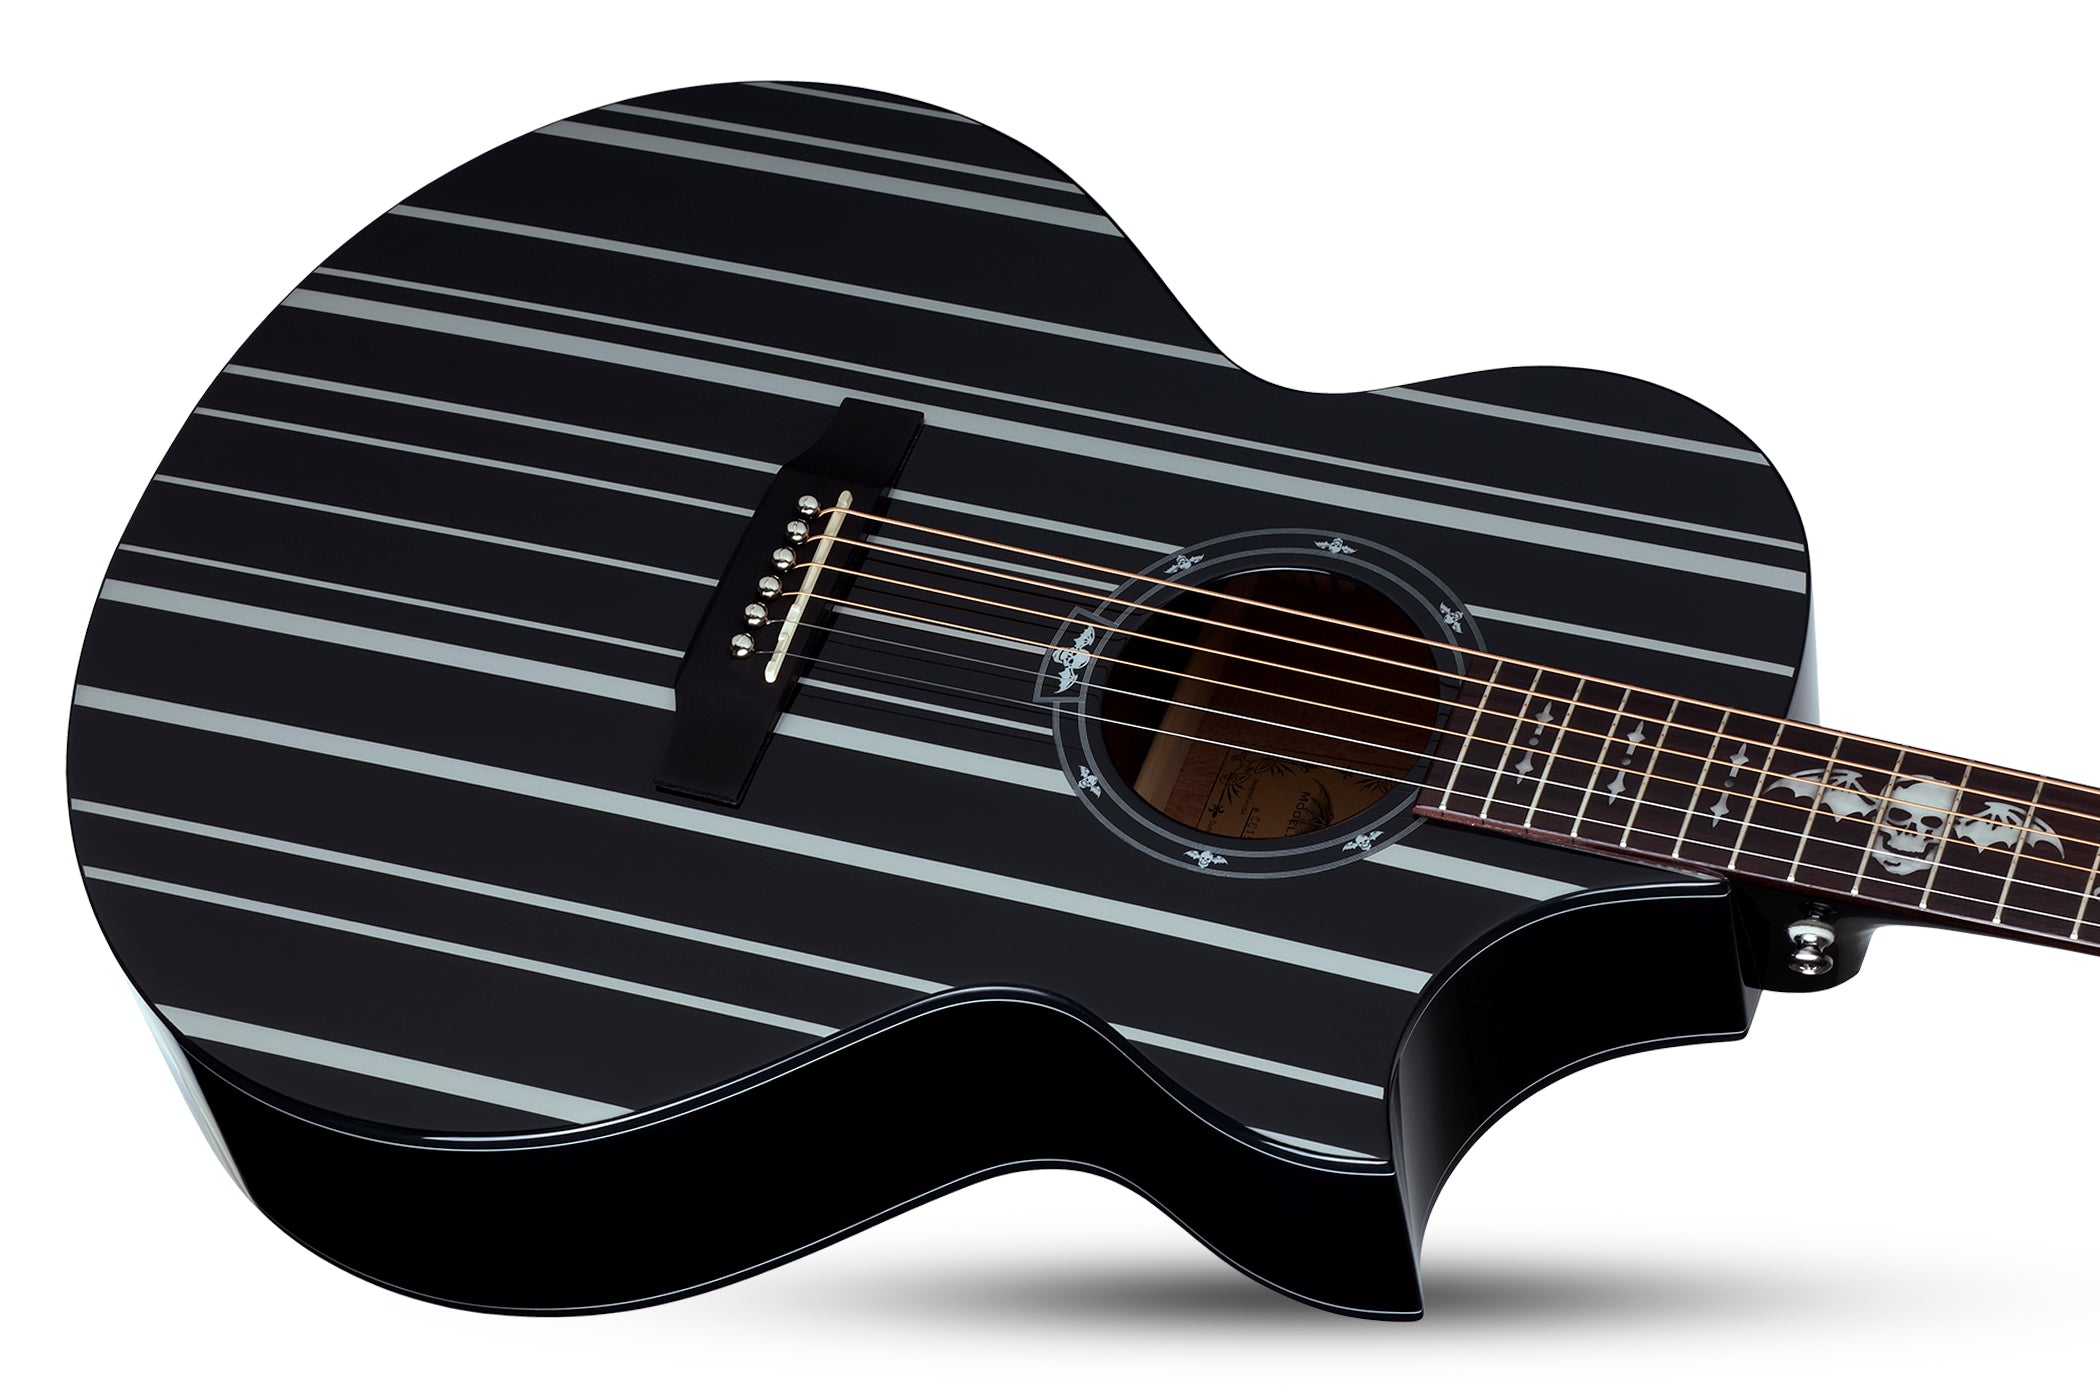 SCHECTER ELECTRIC GUITAR SYNYSTER GATES ACOUSTIC GUITAR GLOSS BLACK WITH SILVER PINSTRIPE (3700), SCHECTER, ACOUSTIC GUITAR, schecter-acoustic-guitar-synac-ga-sc-gbsp, ZOSO MUSIC SDN BHD